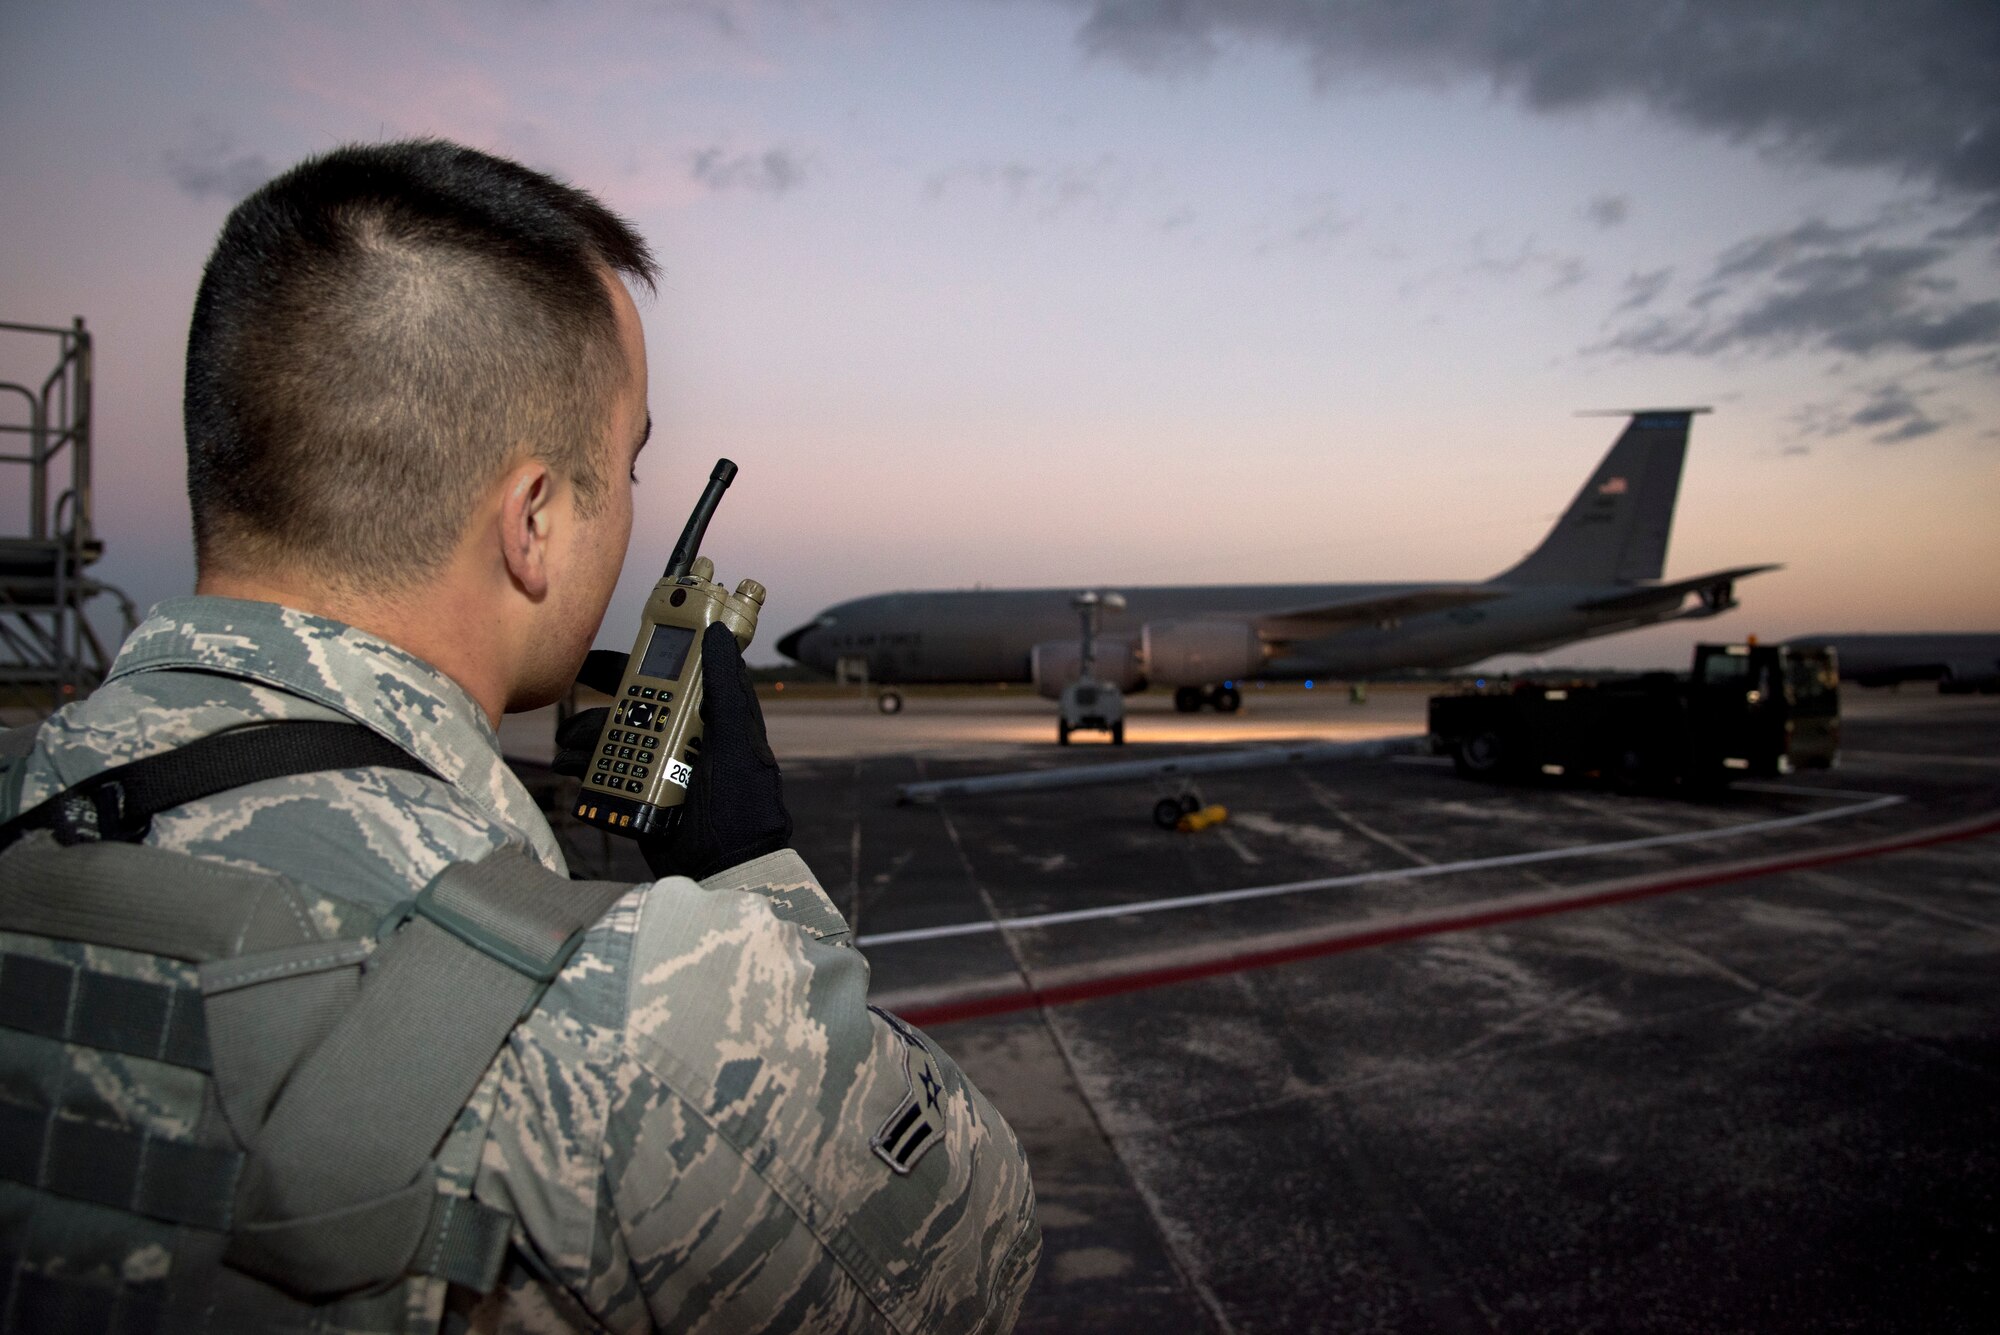 U.S. Air Force Airman 1st Class Christian Dufresne, an entry controller assigned to the 6th Security Forces Squadron (SFS), provides security for the flightline at MacDill Air Force Base, Fla., Feb. 9, 2019. Dufresne secured the flightline’s resources with a team of 6th SFS Airmen during a three-day readiness exercise.